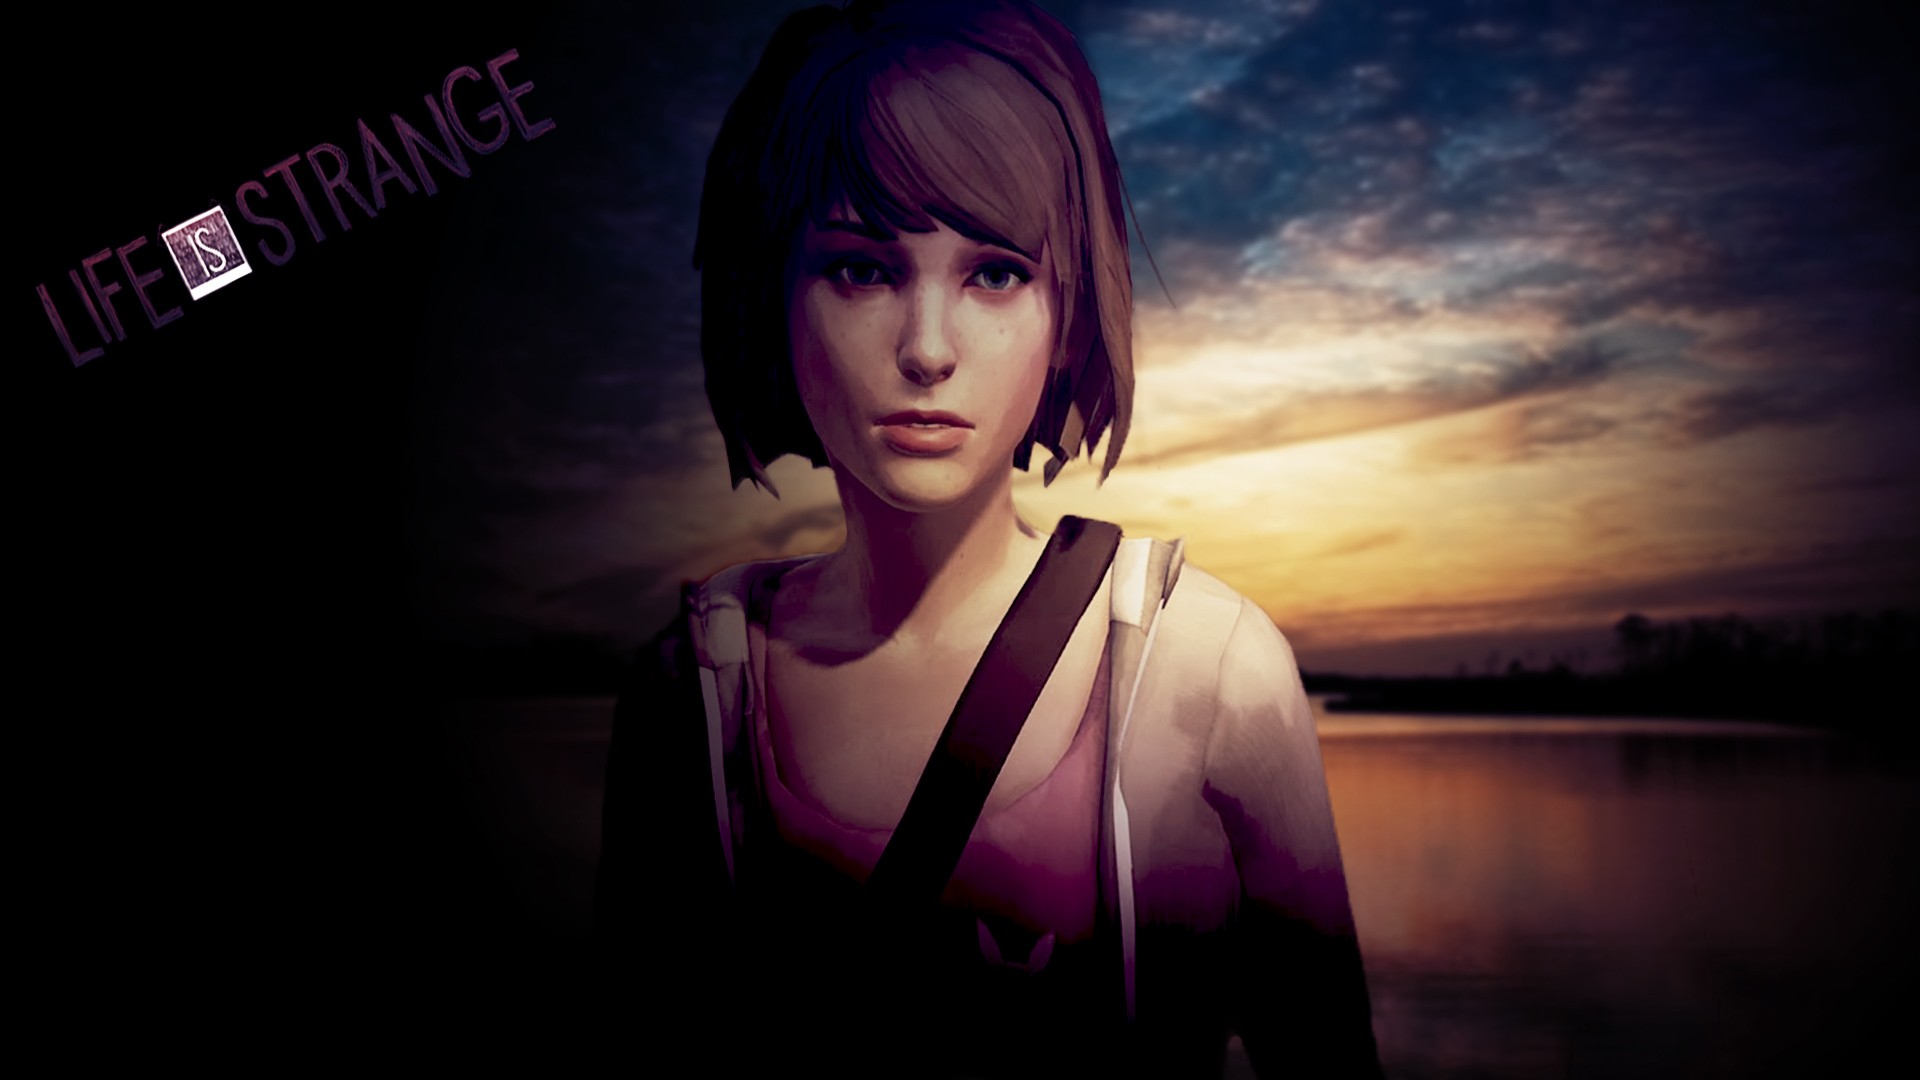 Life Is Strange Max Caulfield Video Games Video Game Heroes Video Game Art 1920x1080